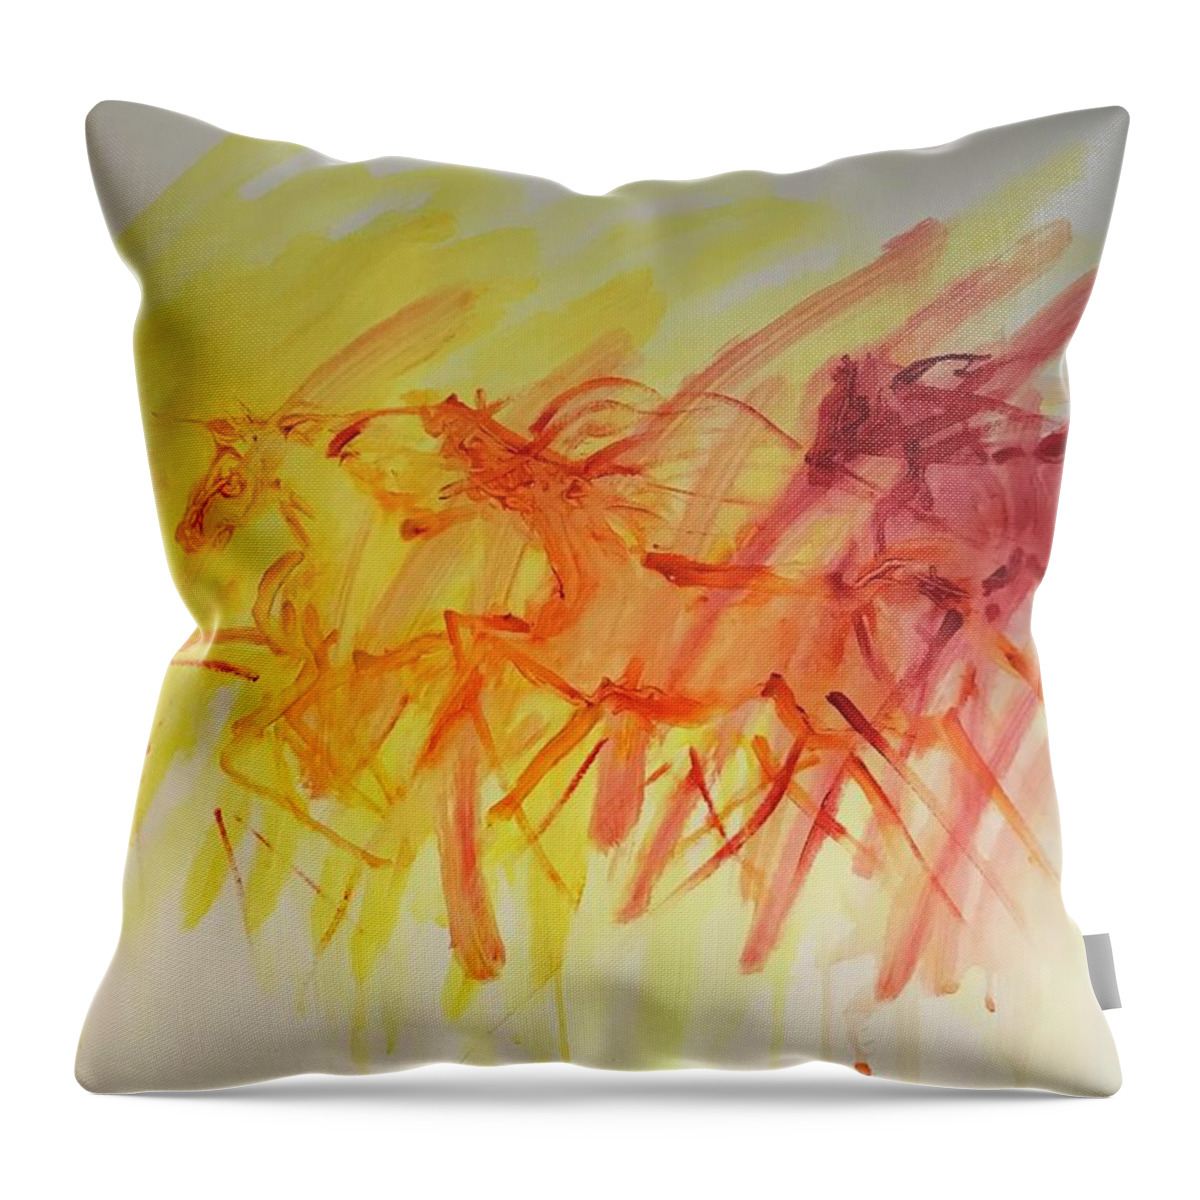 Horses Throw Pillow featuring the painting Img_3404 by Elizabeth Parashis